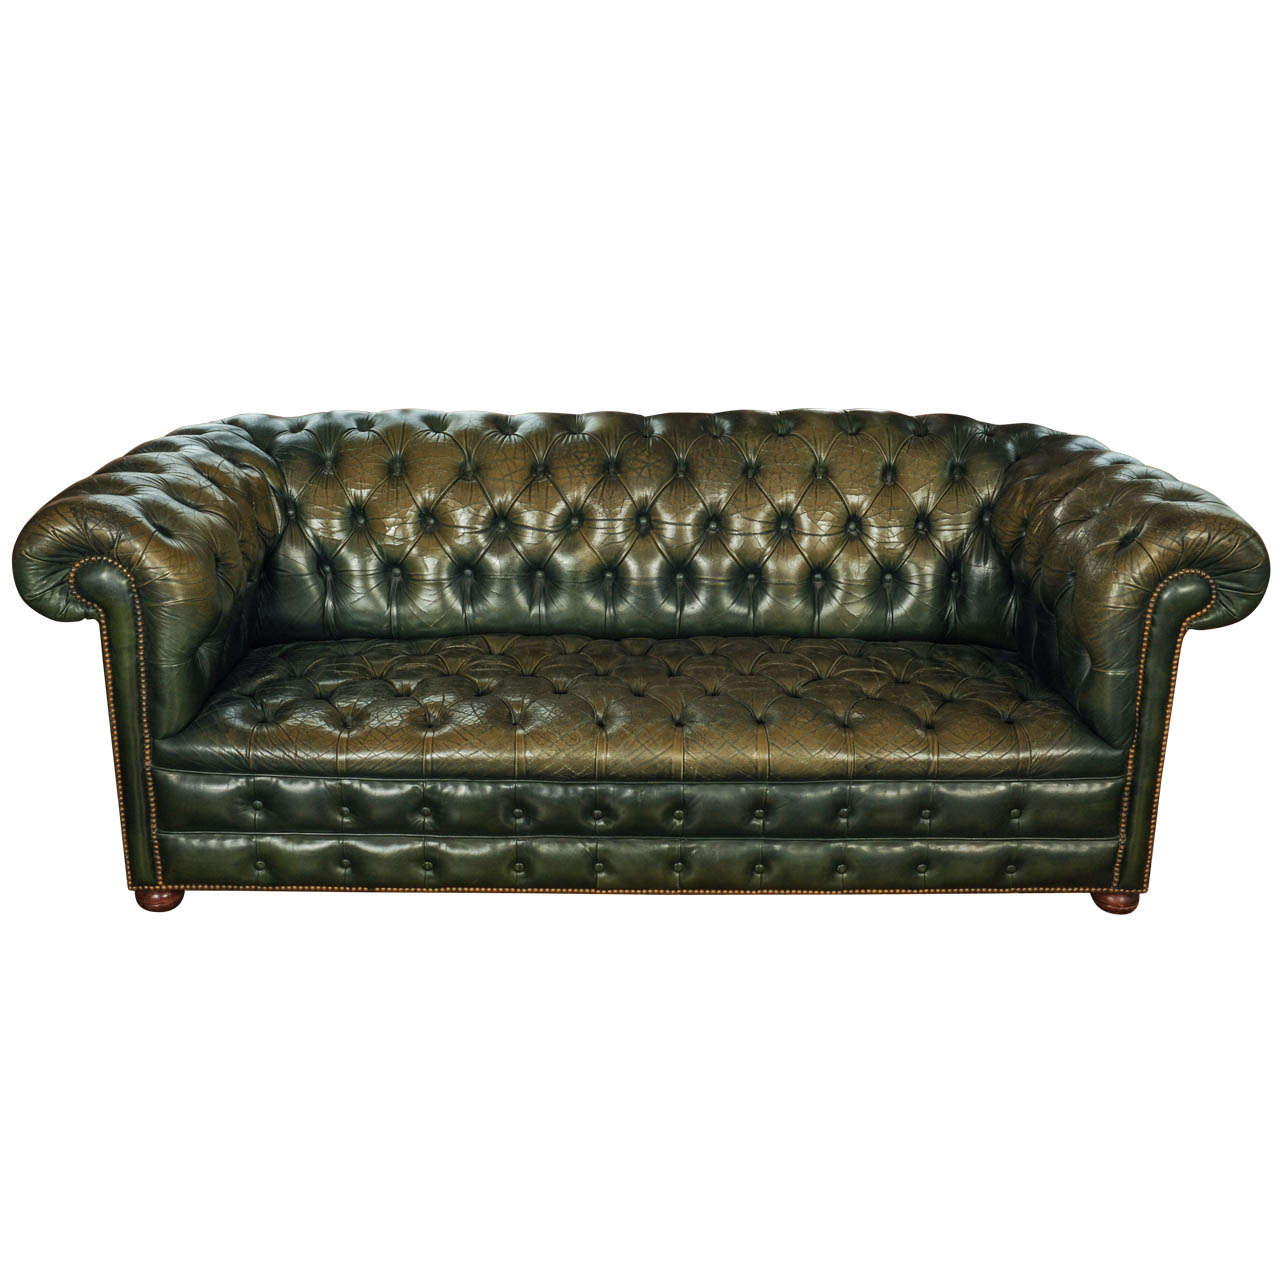 Vintage Green Leather Chesterfield Sofa